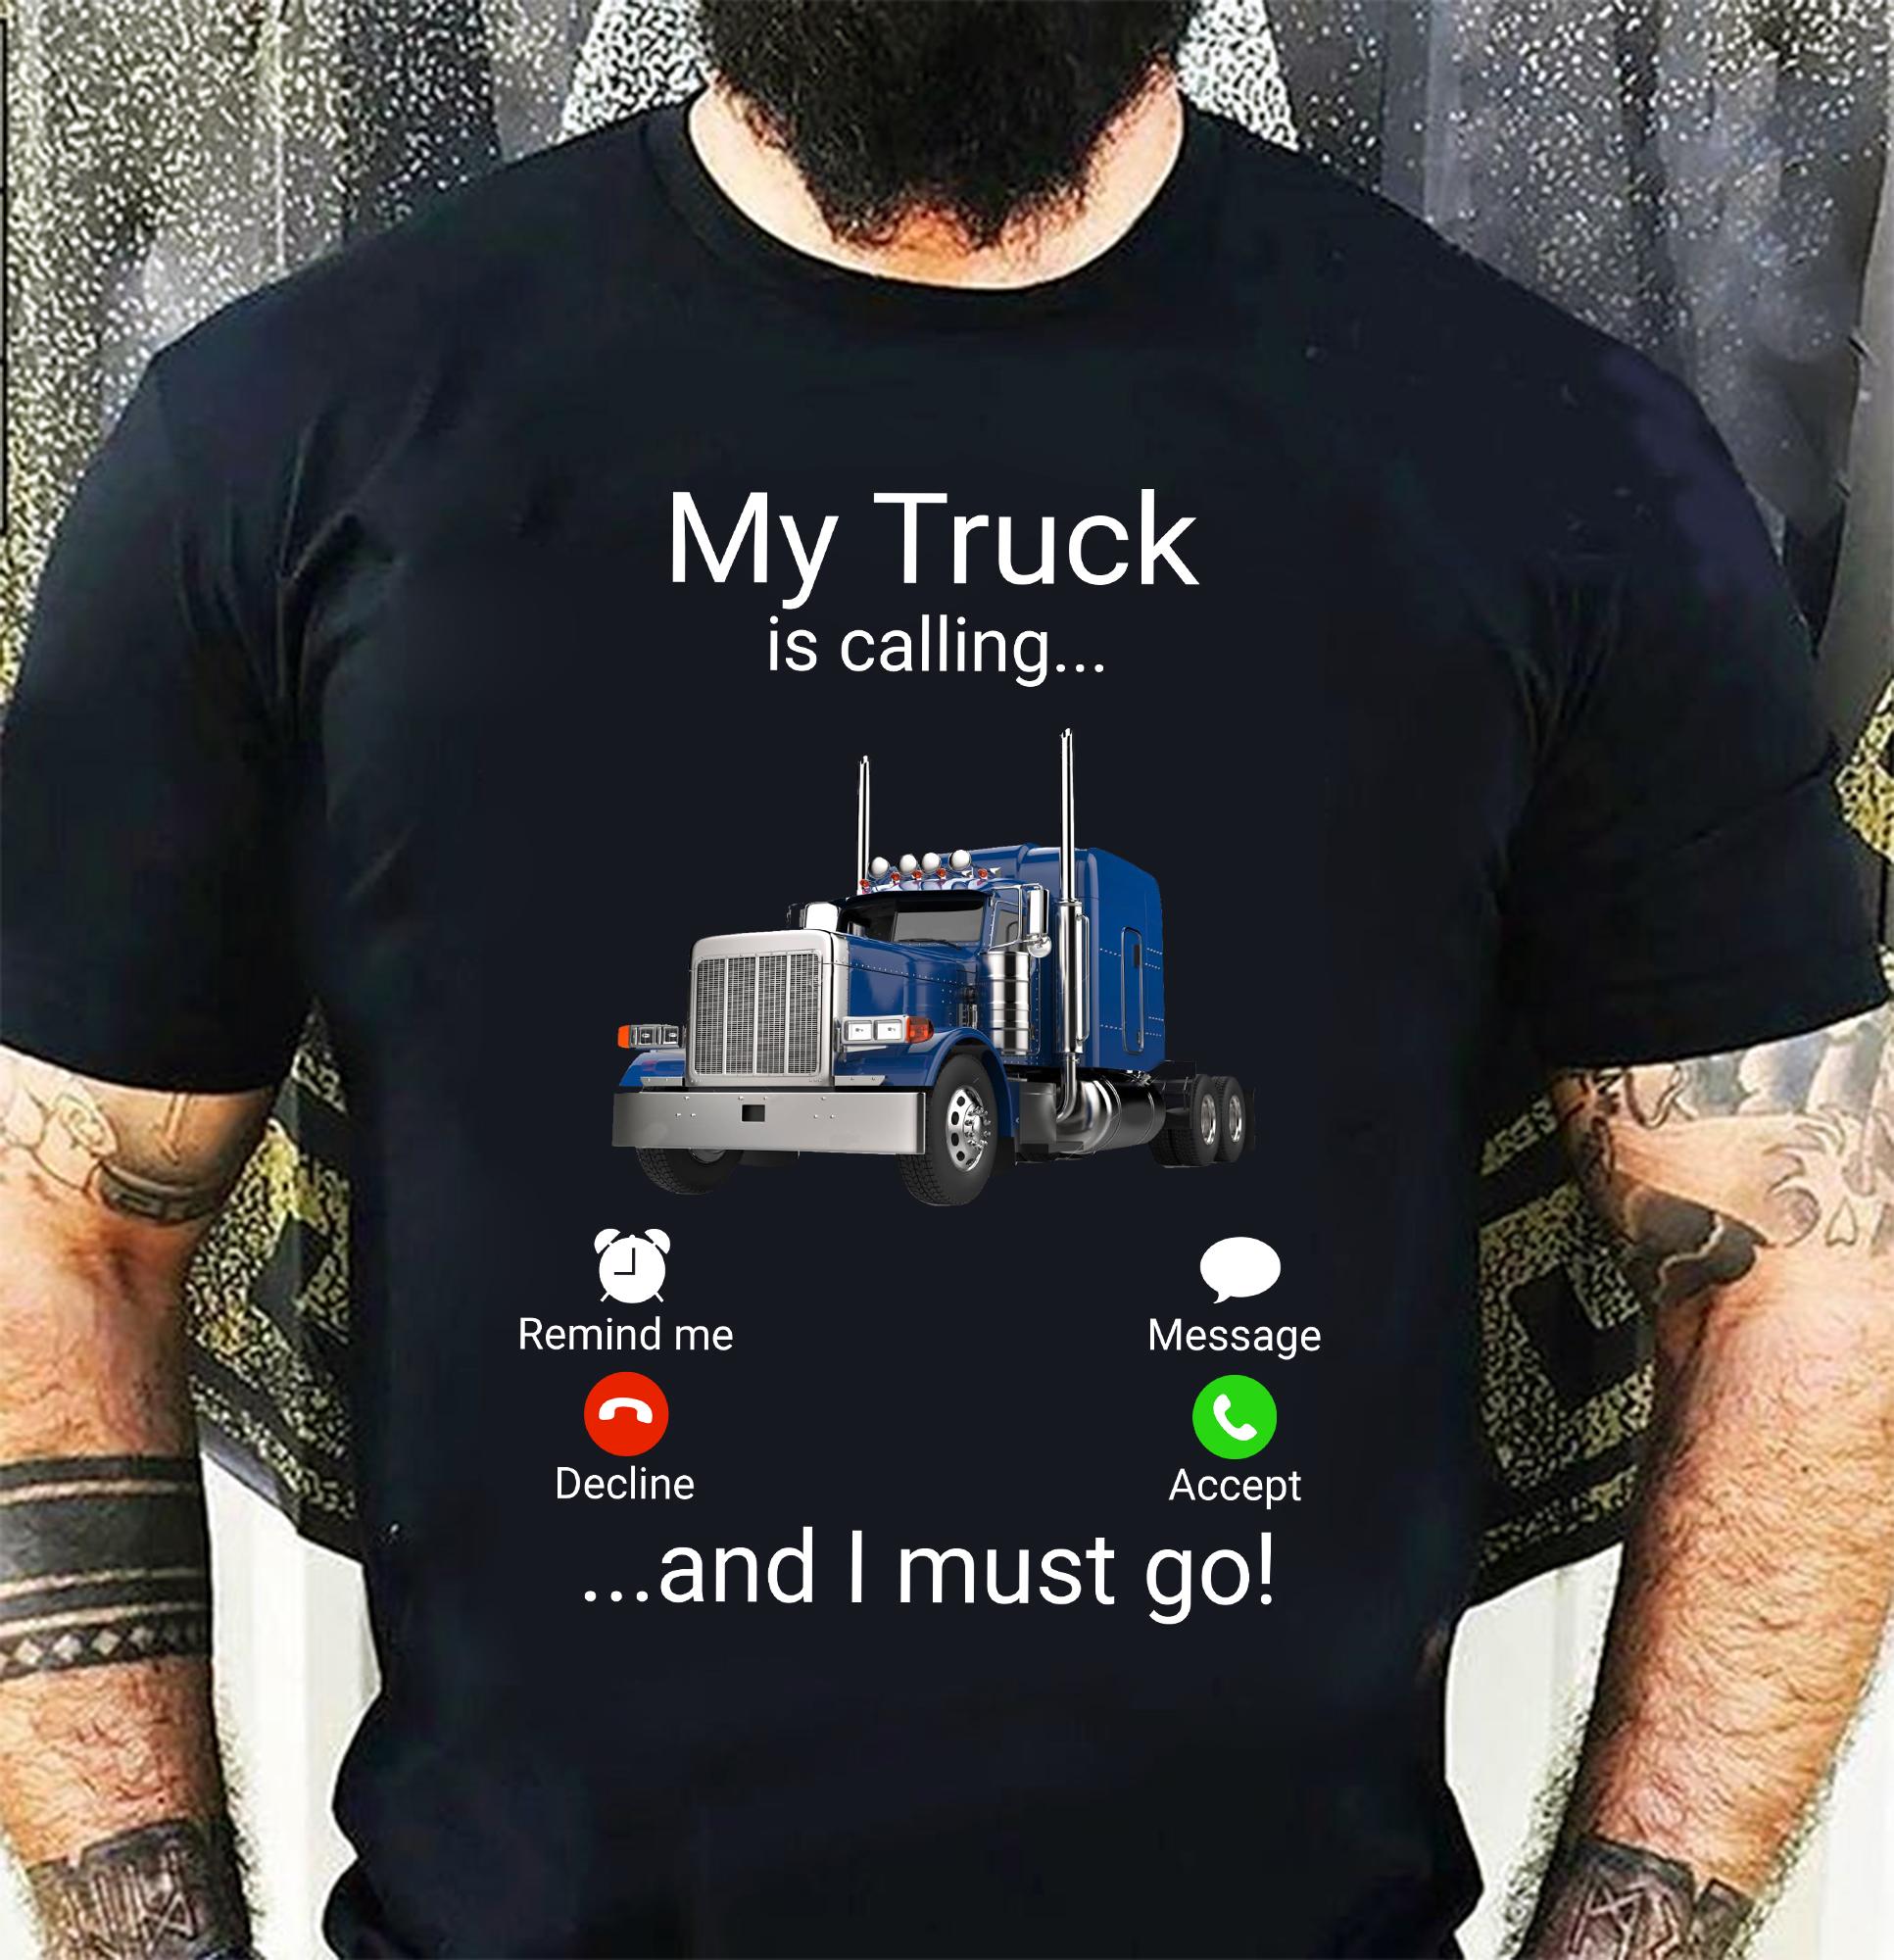 Call The Truck - My truck is calling and i must go